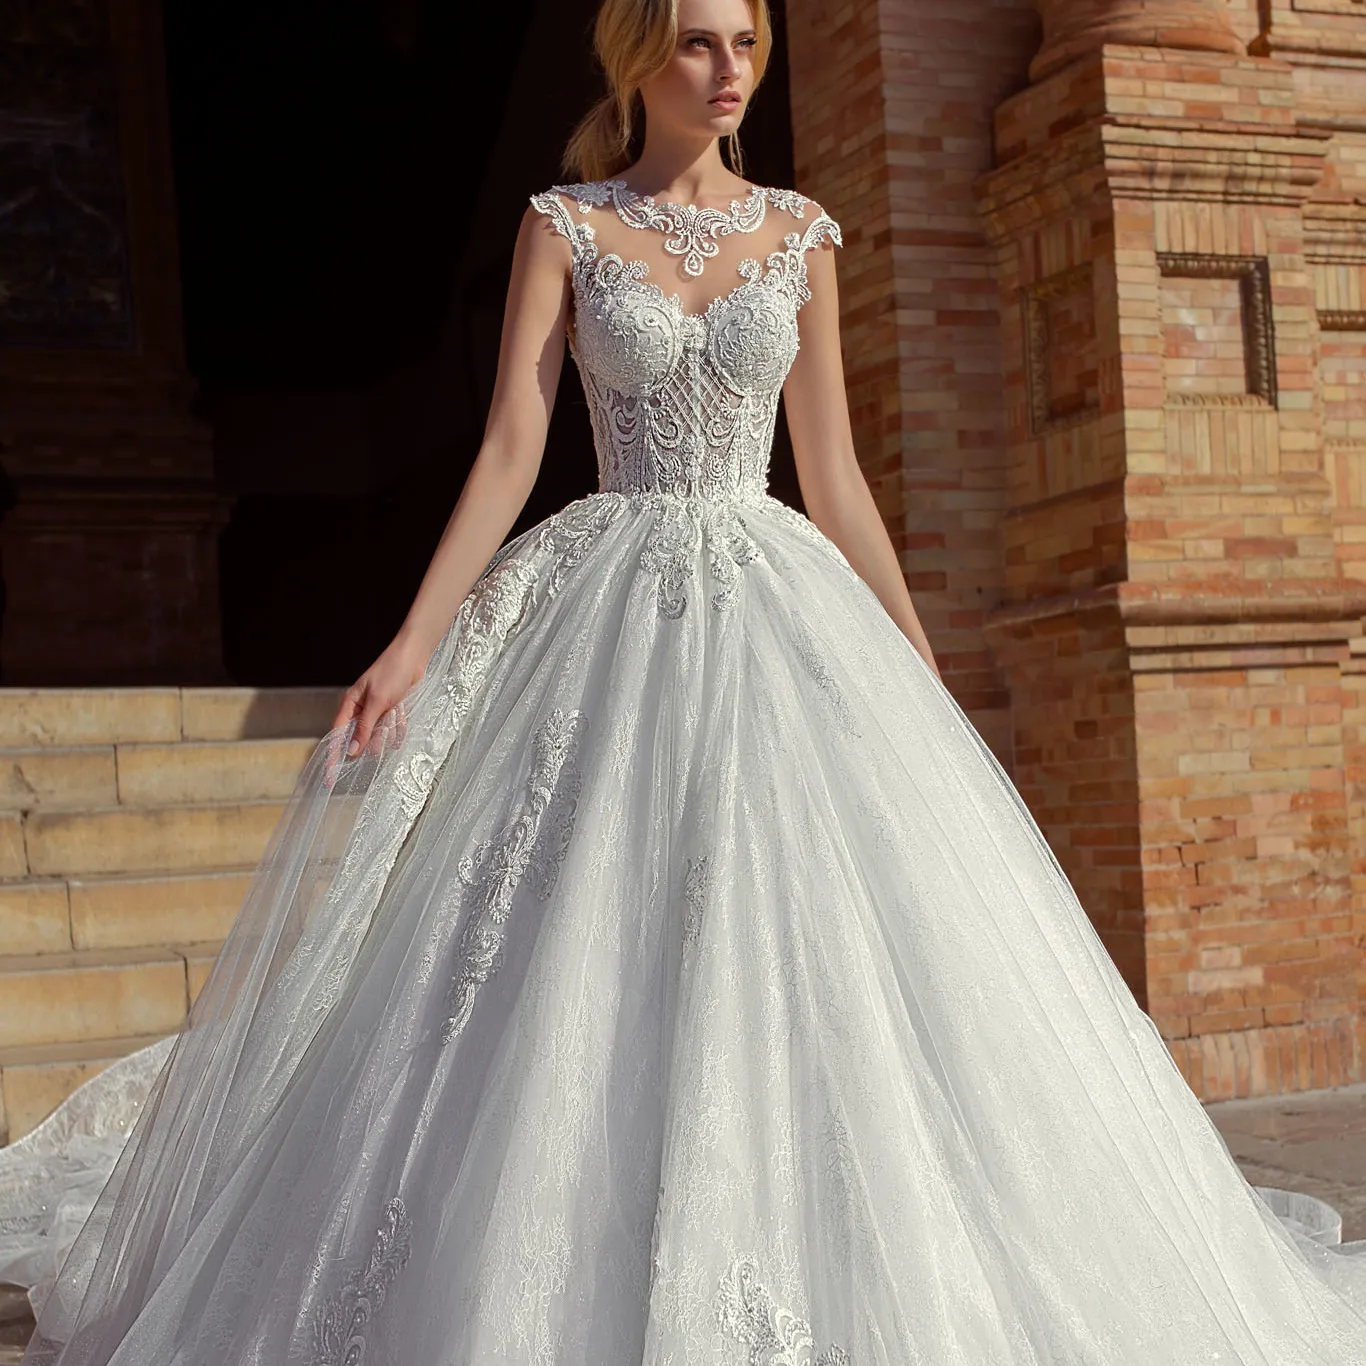 2022 Wedding Dresses Gown Large size Robe De Mariage bridal gowns Rhindestone Bodices African wedding dress